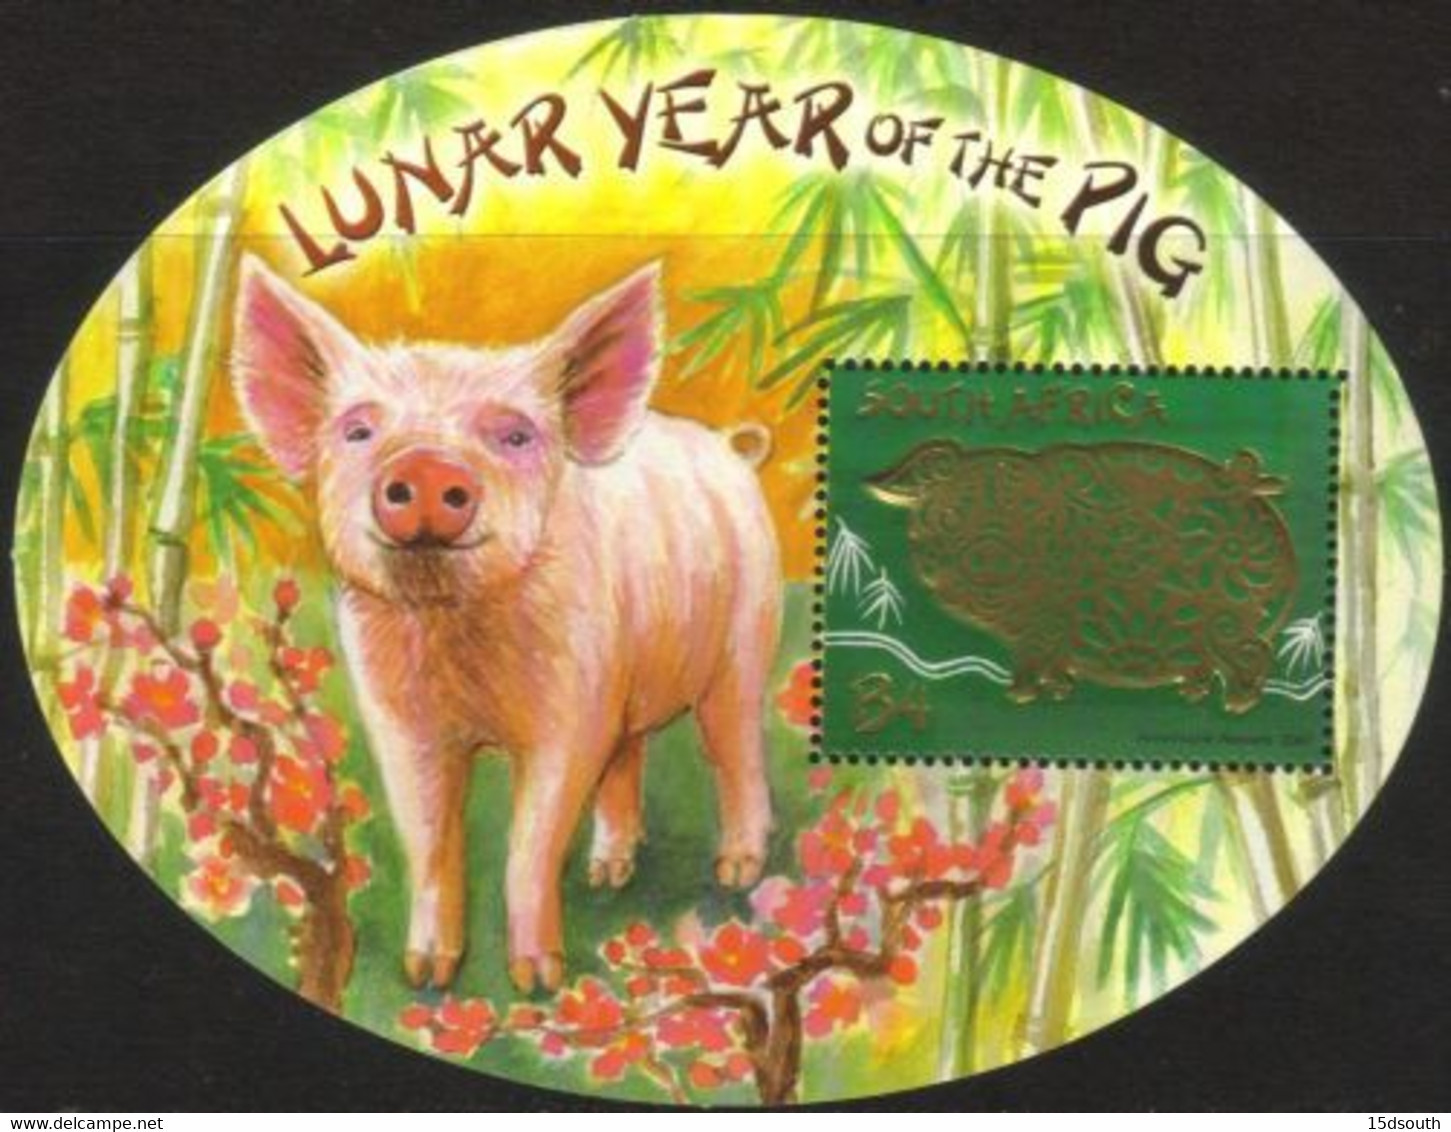 South Africa - 2007 Year Of The Pig MS (**) SG 1633 - Chinese New Year